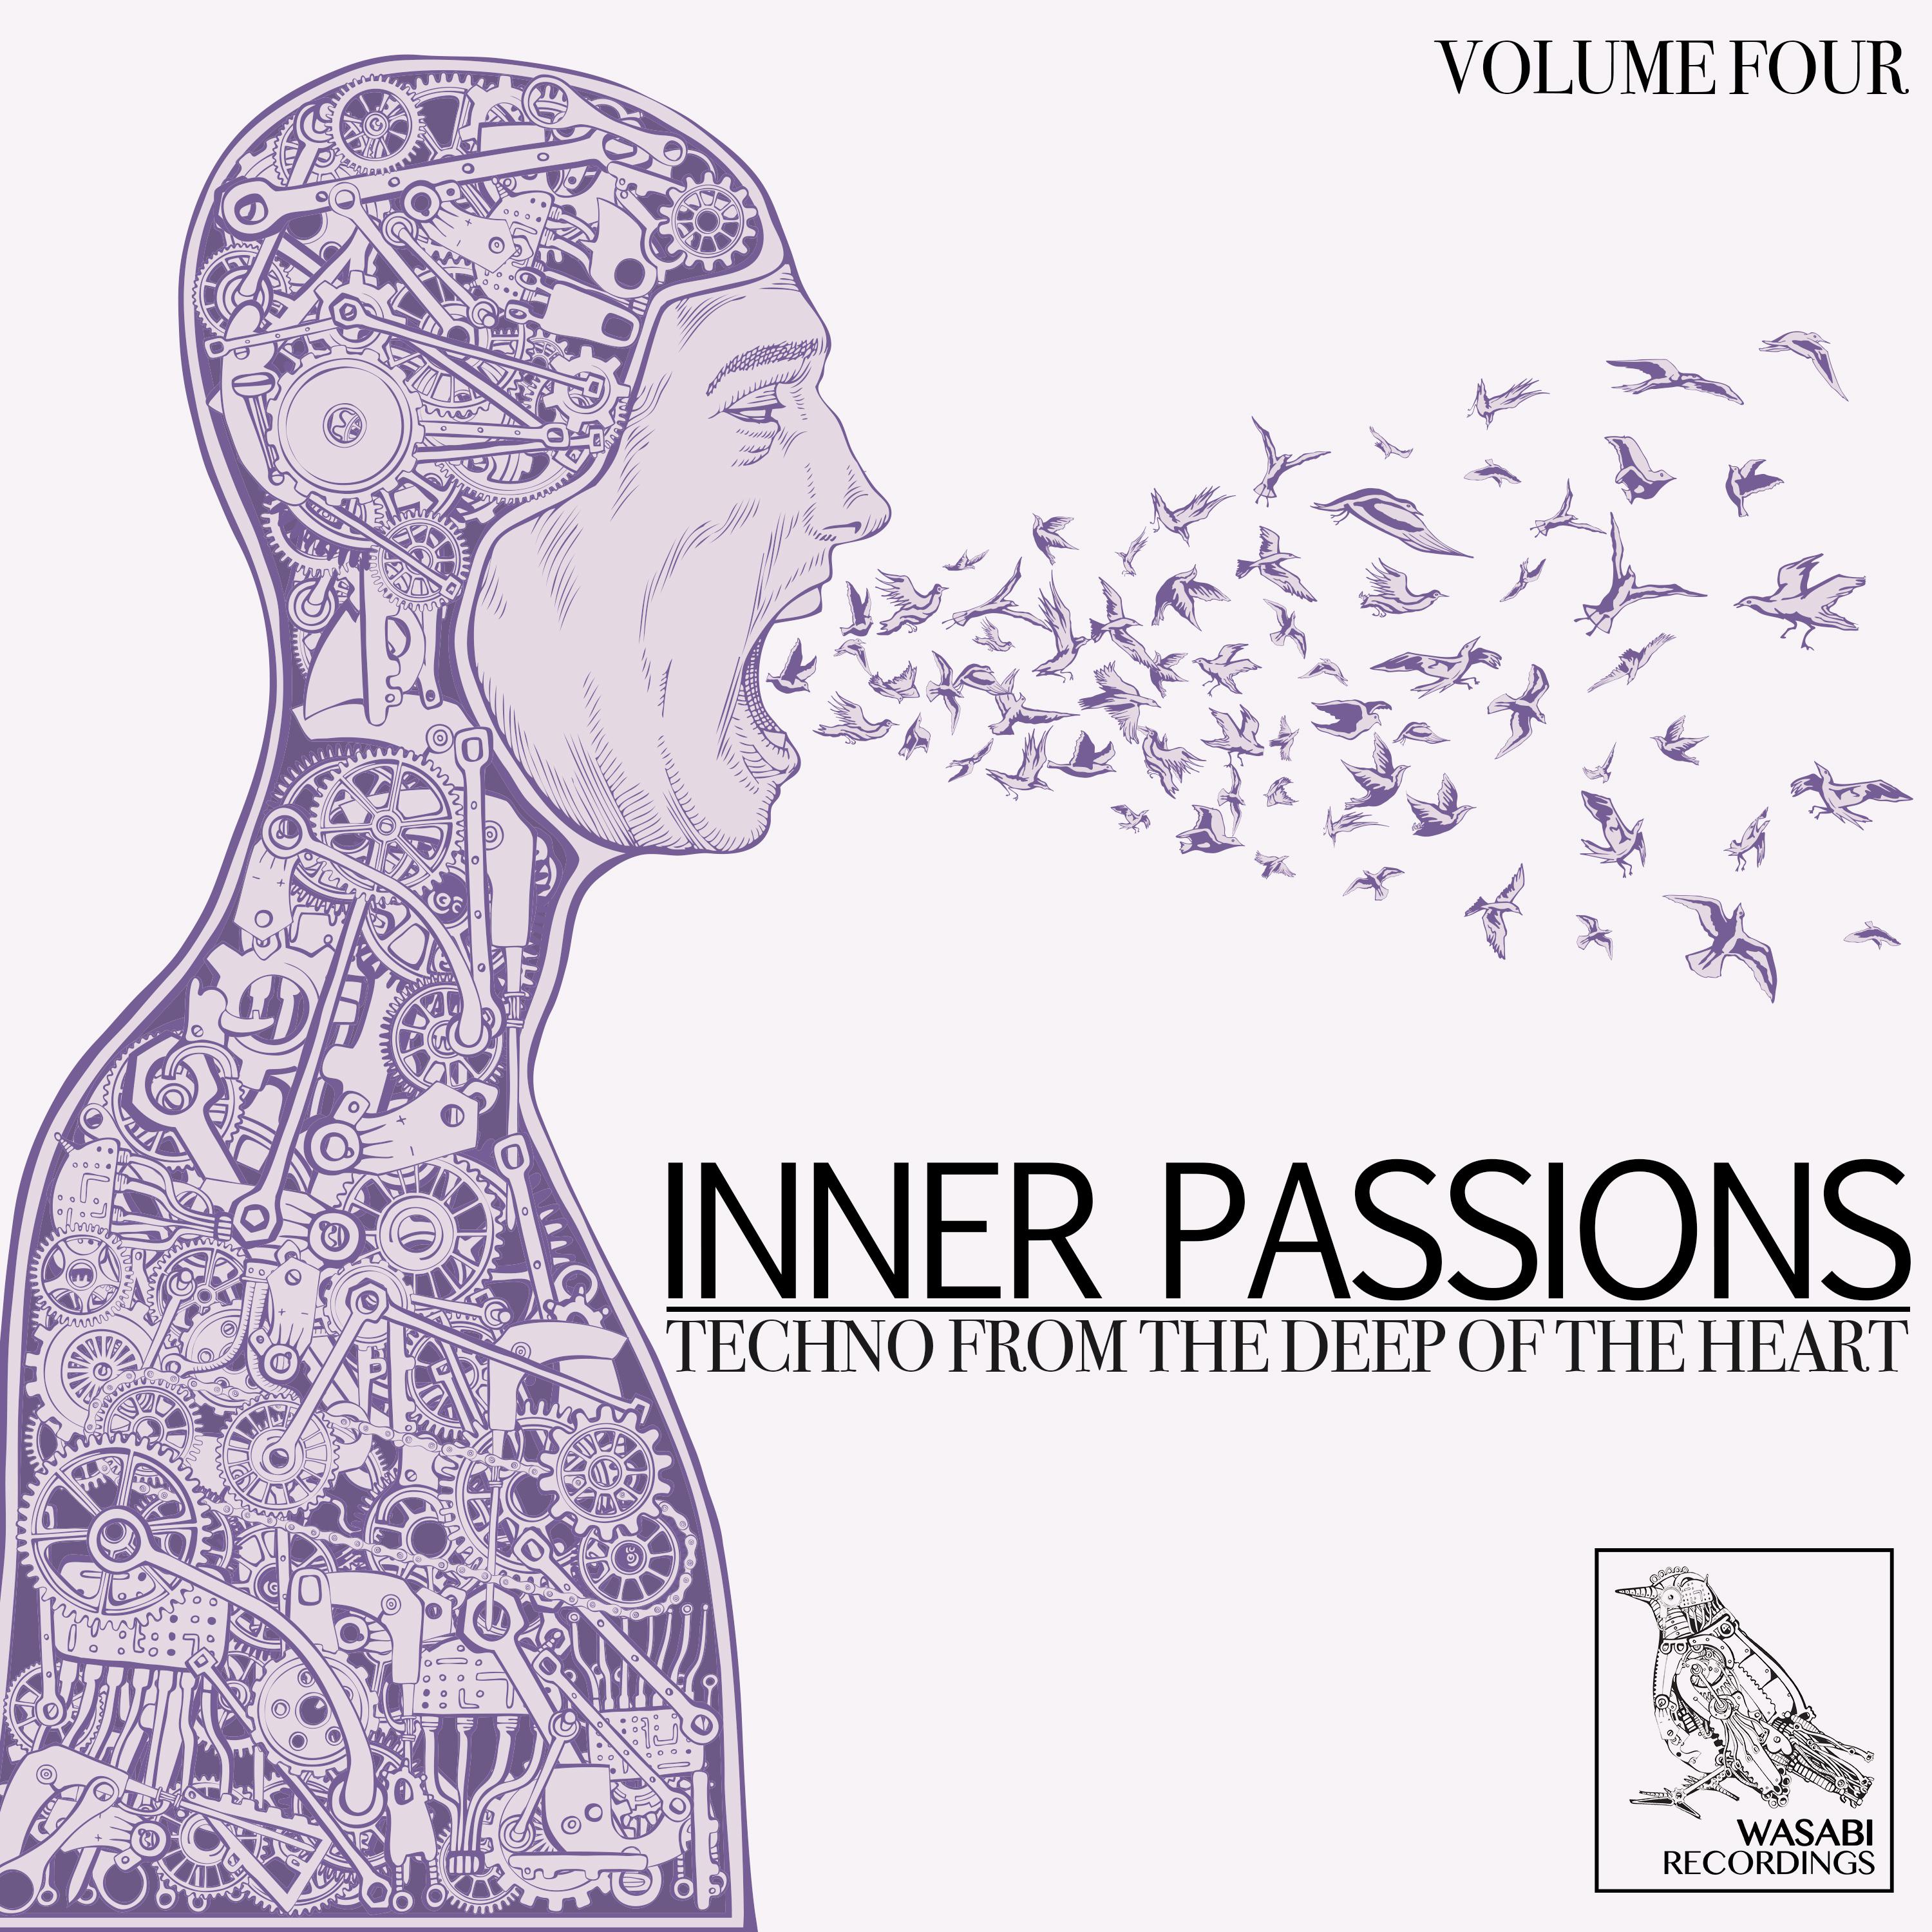 Inner Passions, Vol. 4 - Techno from the Deep of the Heart